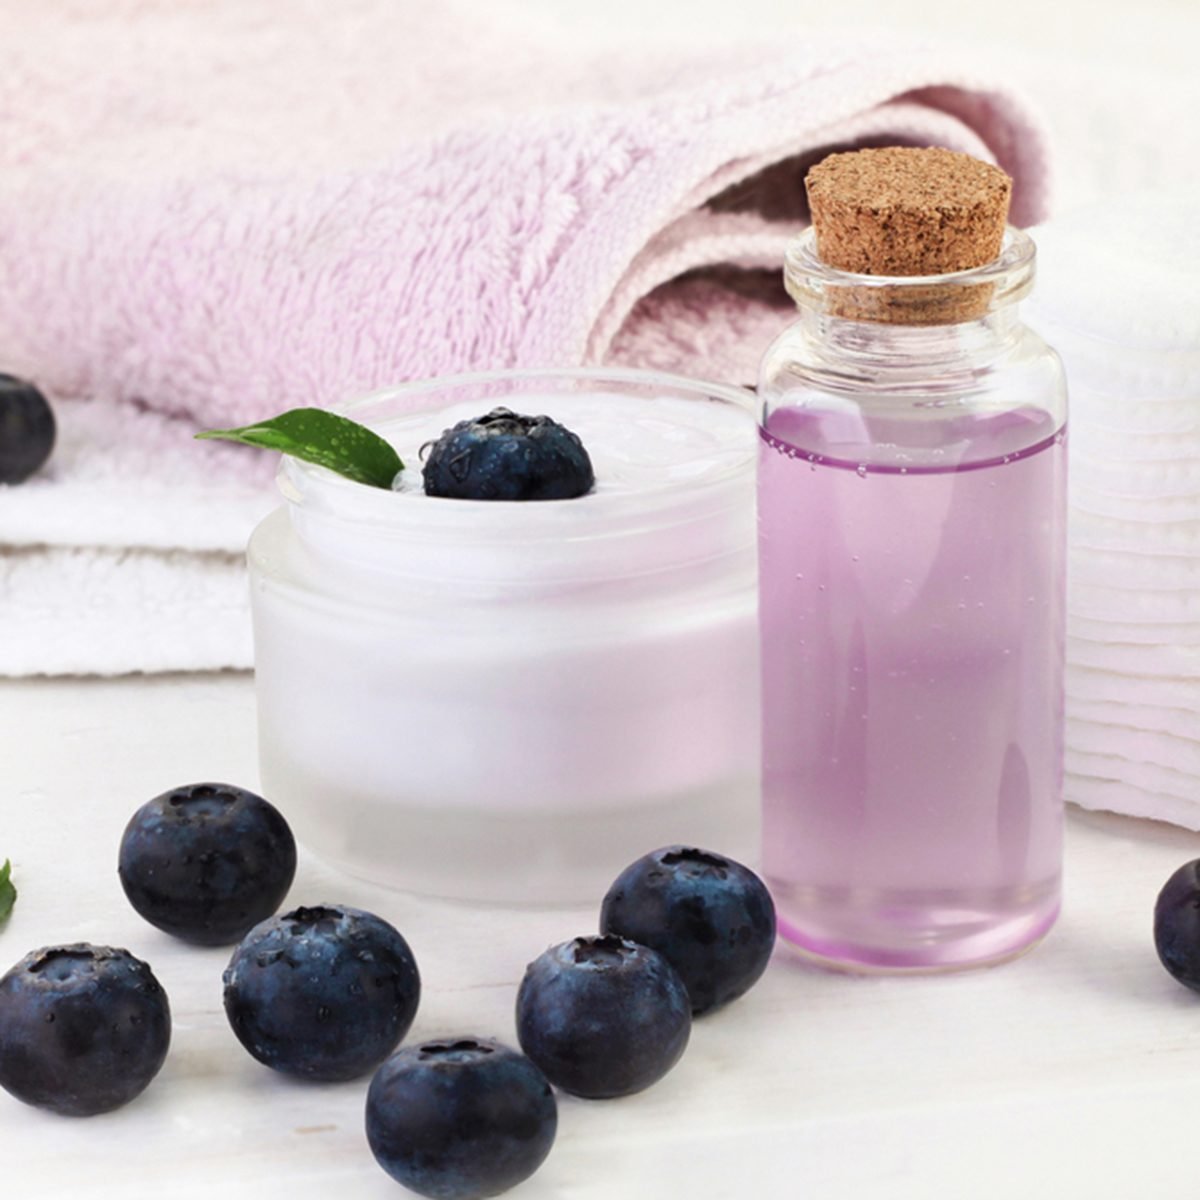 9 Benefits of Blueberries for Health and Beauty